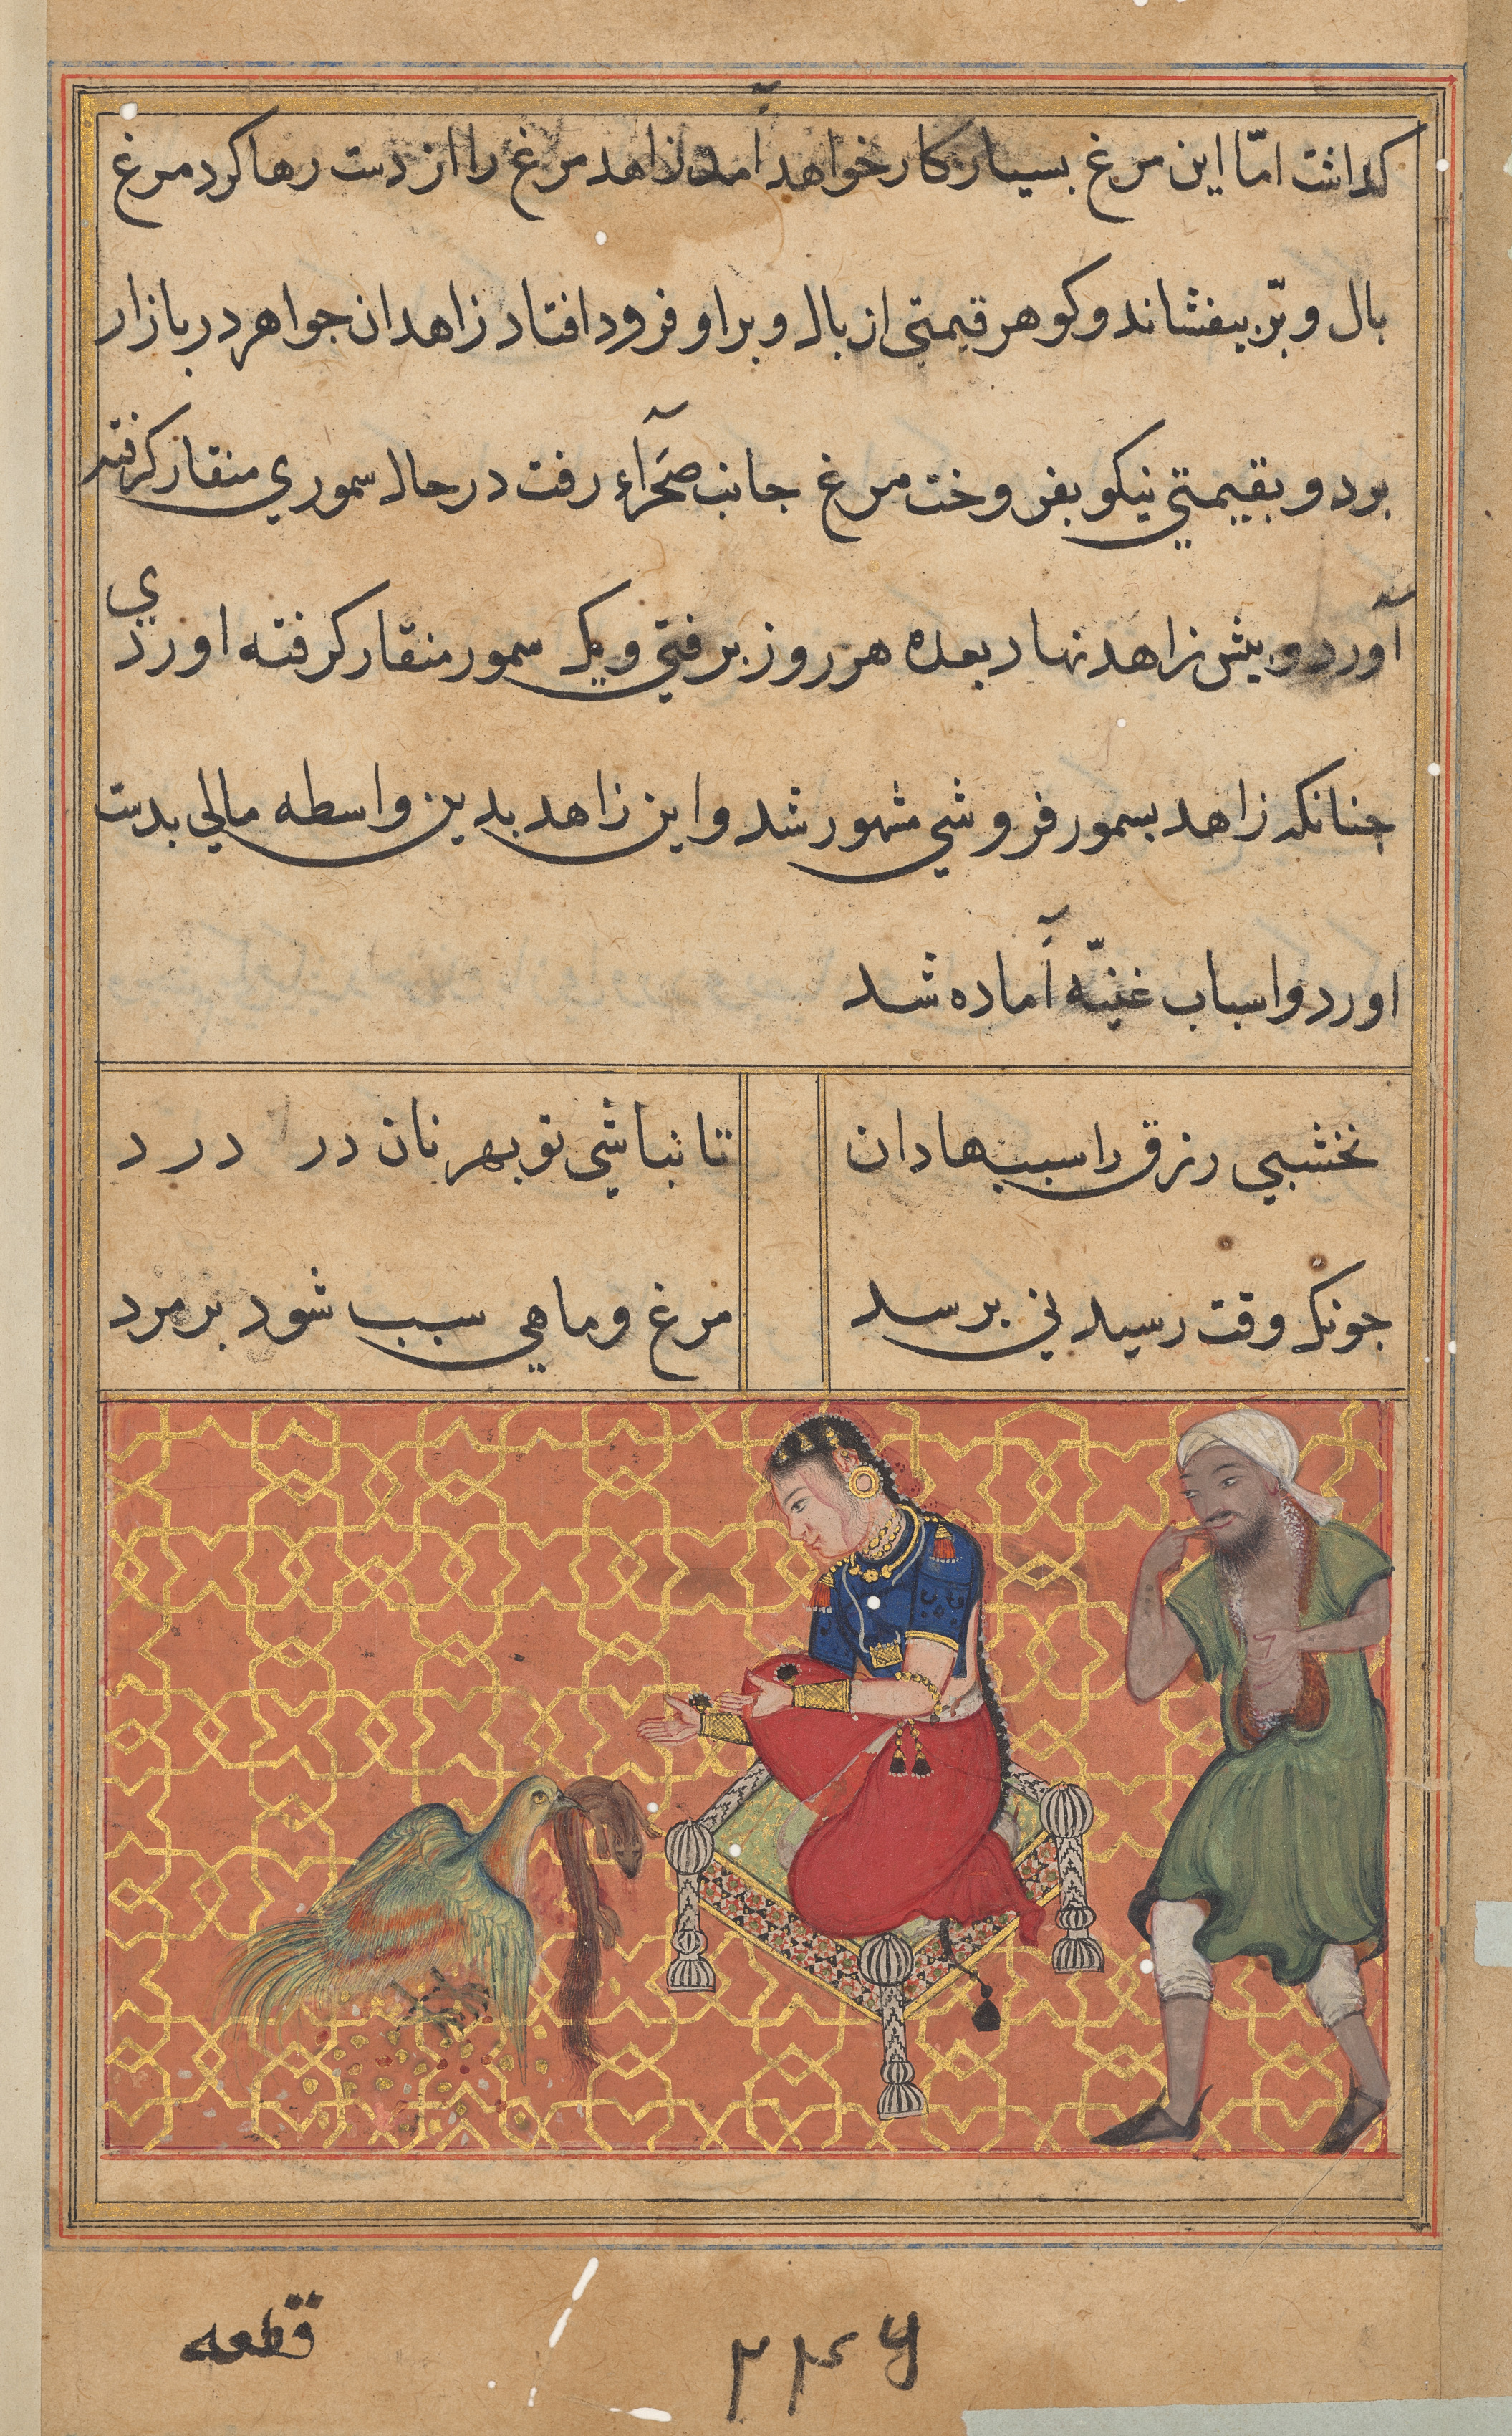 The bird of seven colors brings a sable to the pious man, from a Tuti-nama (Tales of a Parrot): Fifty-second Night